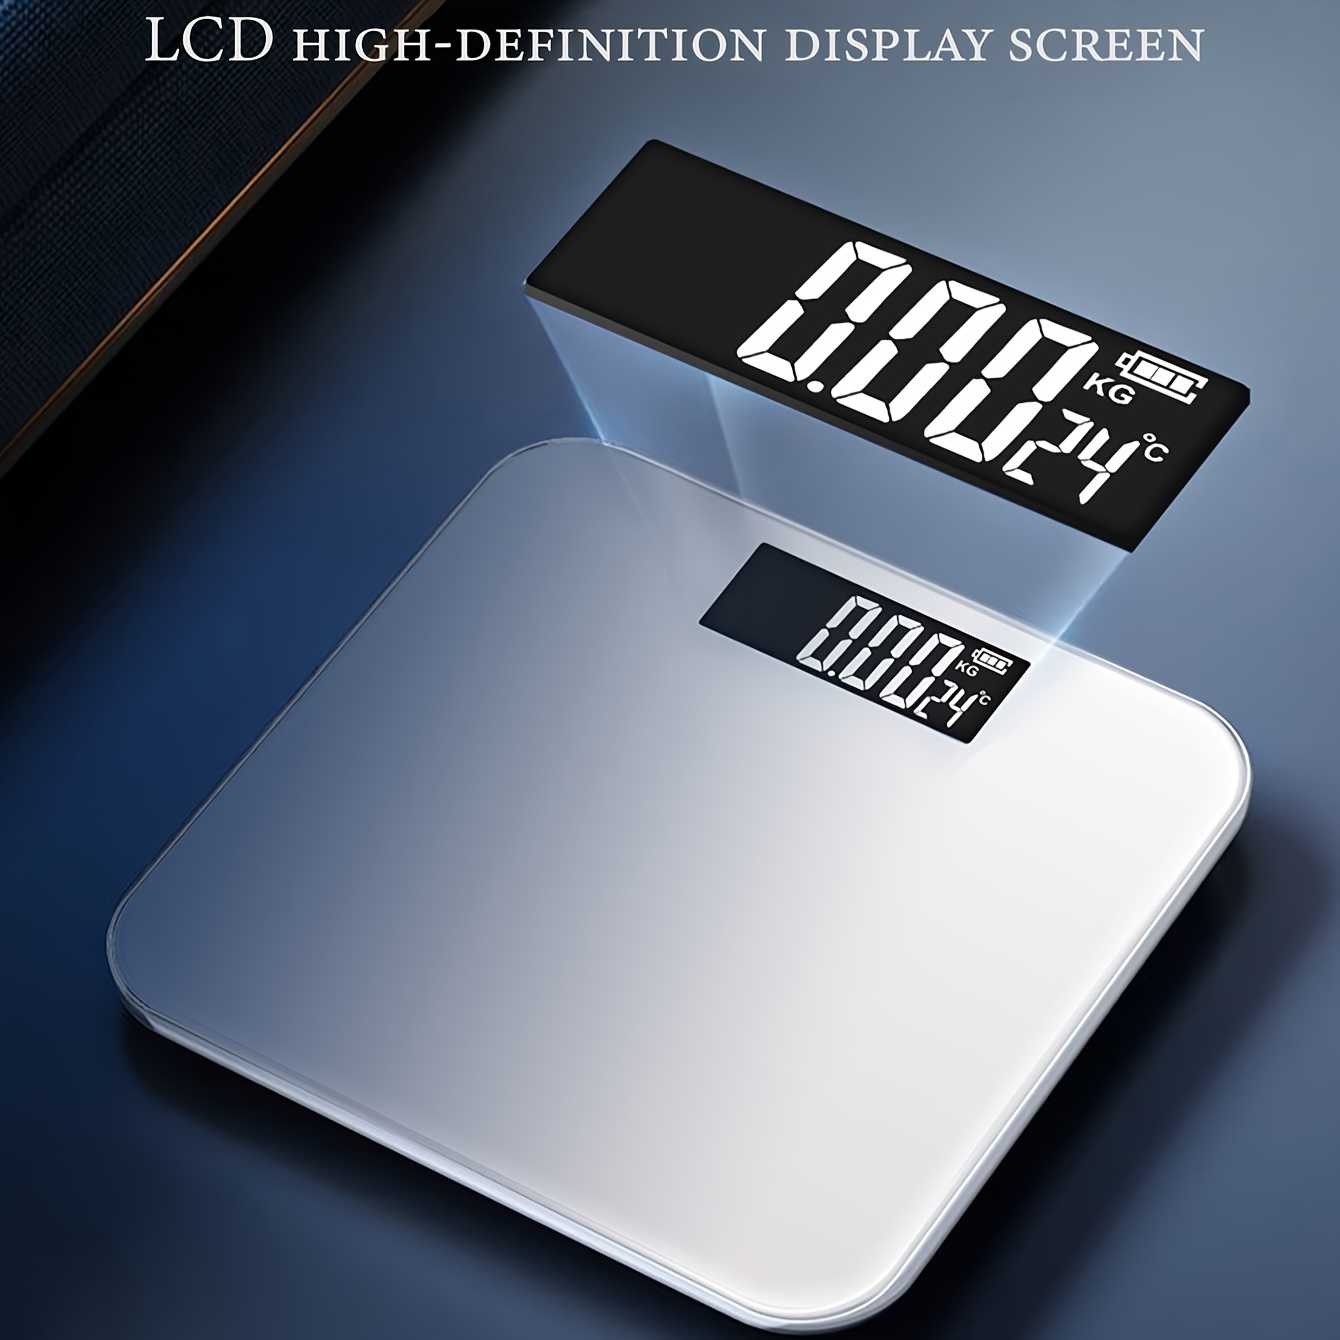 Digital Kitchen Scale Food Scale,Food Grade Balance Scale 0.1oz/1g  Increment,22 lb/10 kg,Backlit LCD Display Function for Weight Loss, Baking,  Cooking, Meal Prep & Keto Diet 